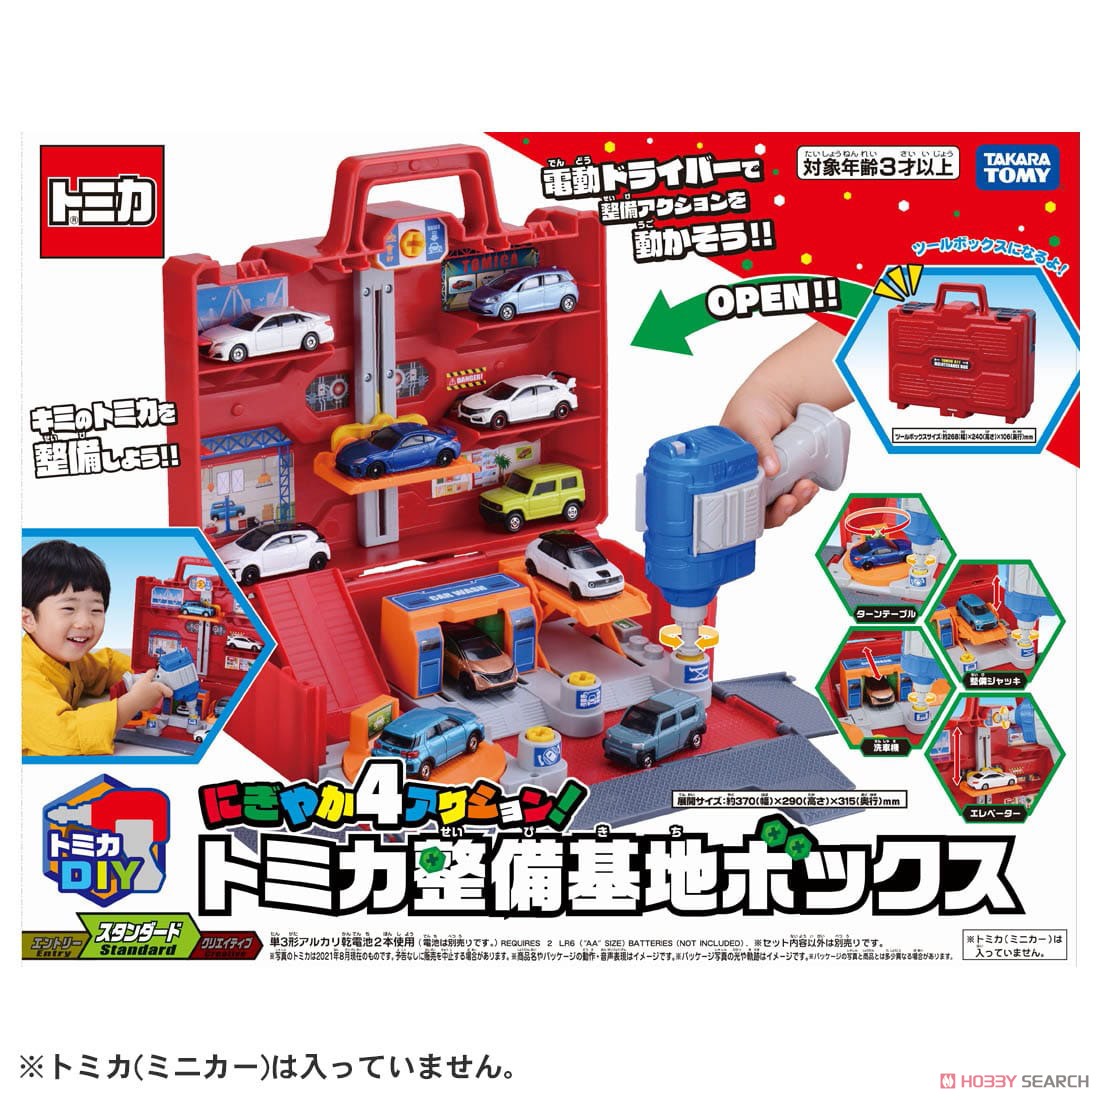 Tomica World Tomica Maintenance Base Box (Tomica) Package1